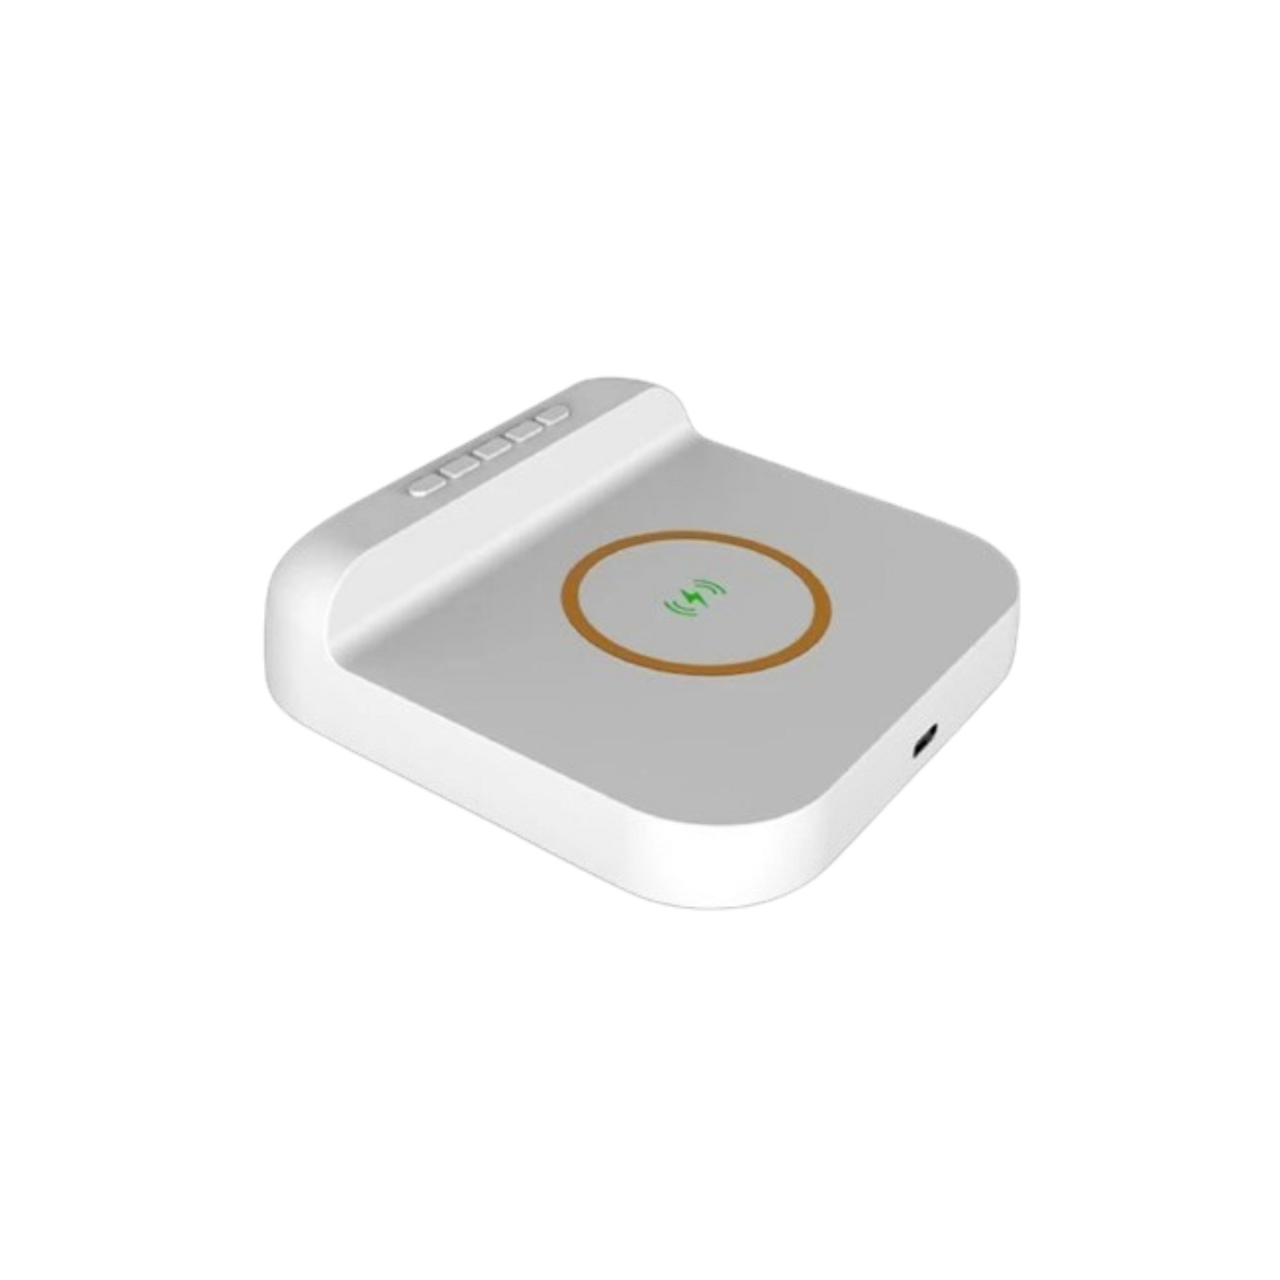 Wireless Charger Alarm Clock product image